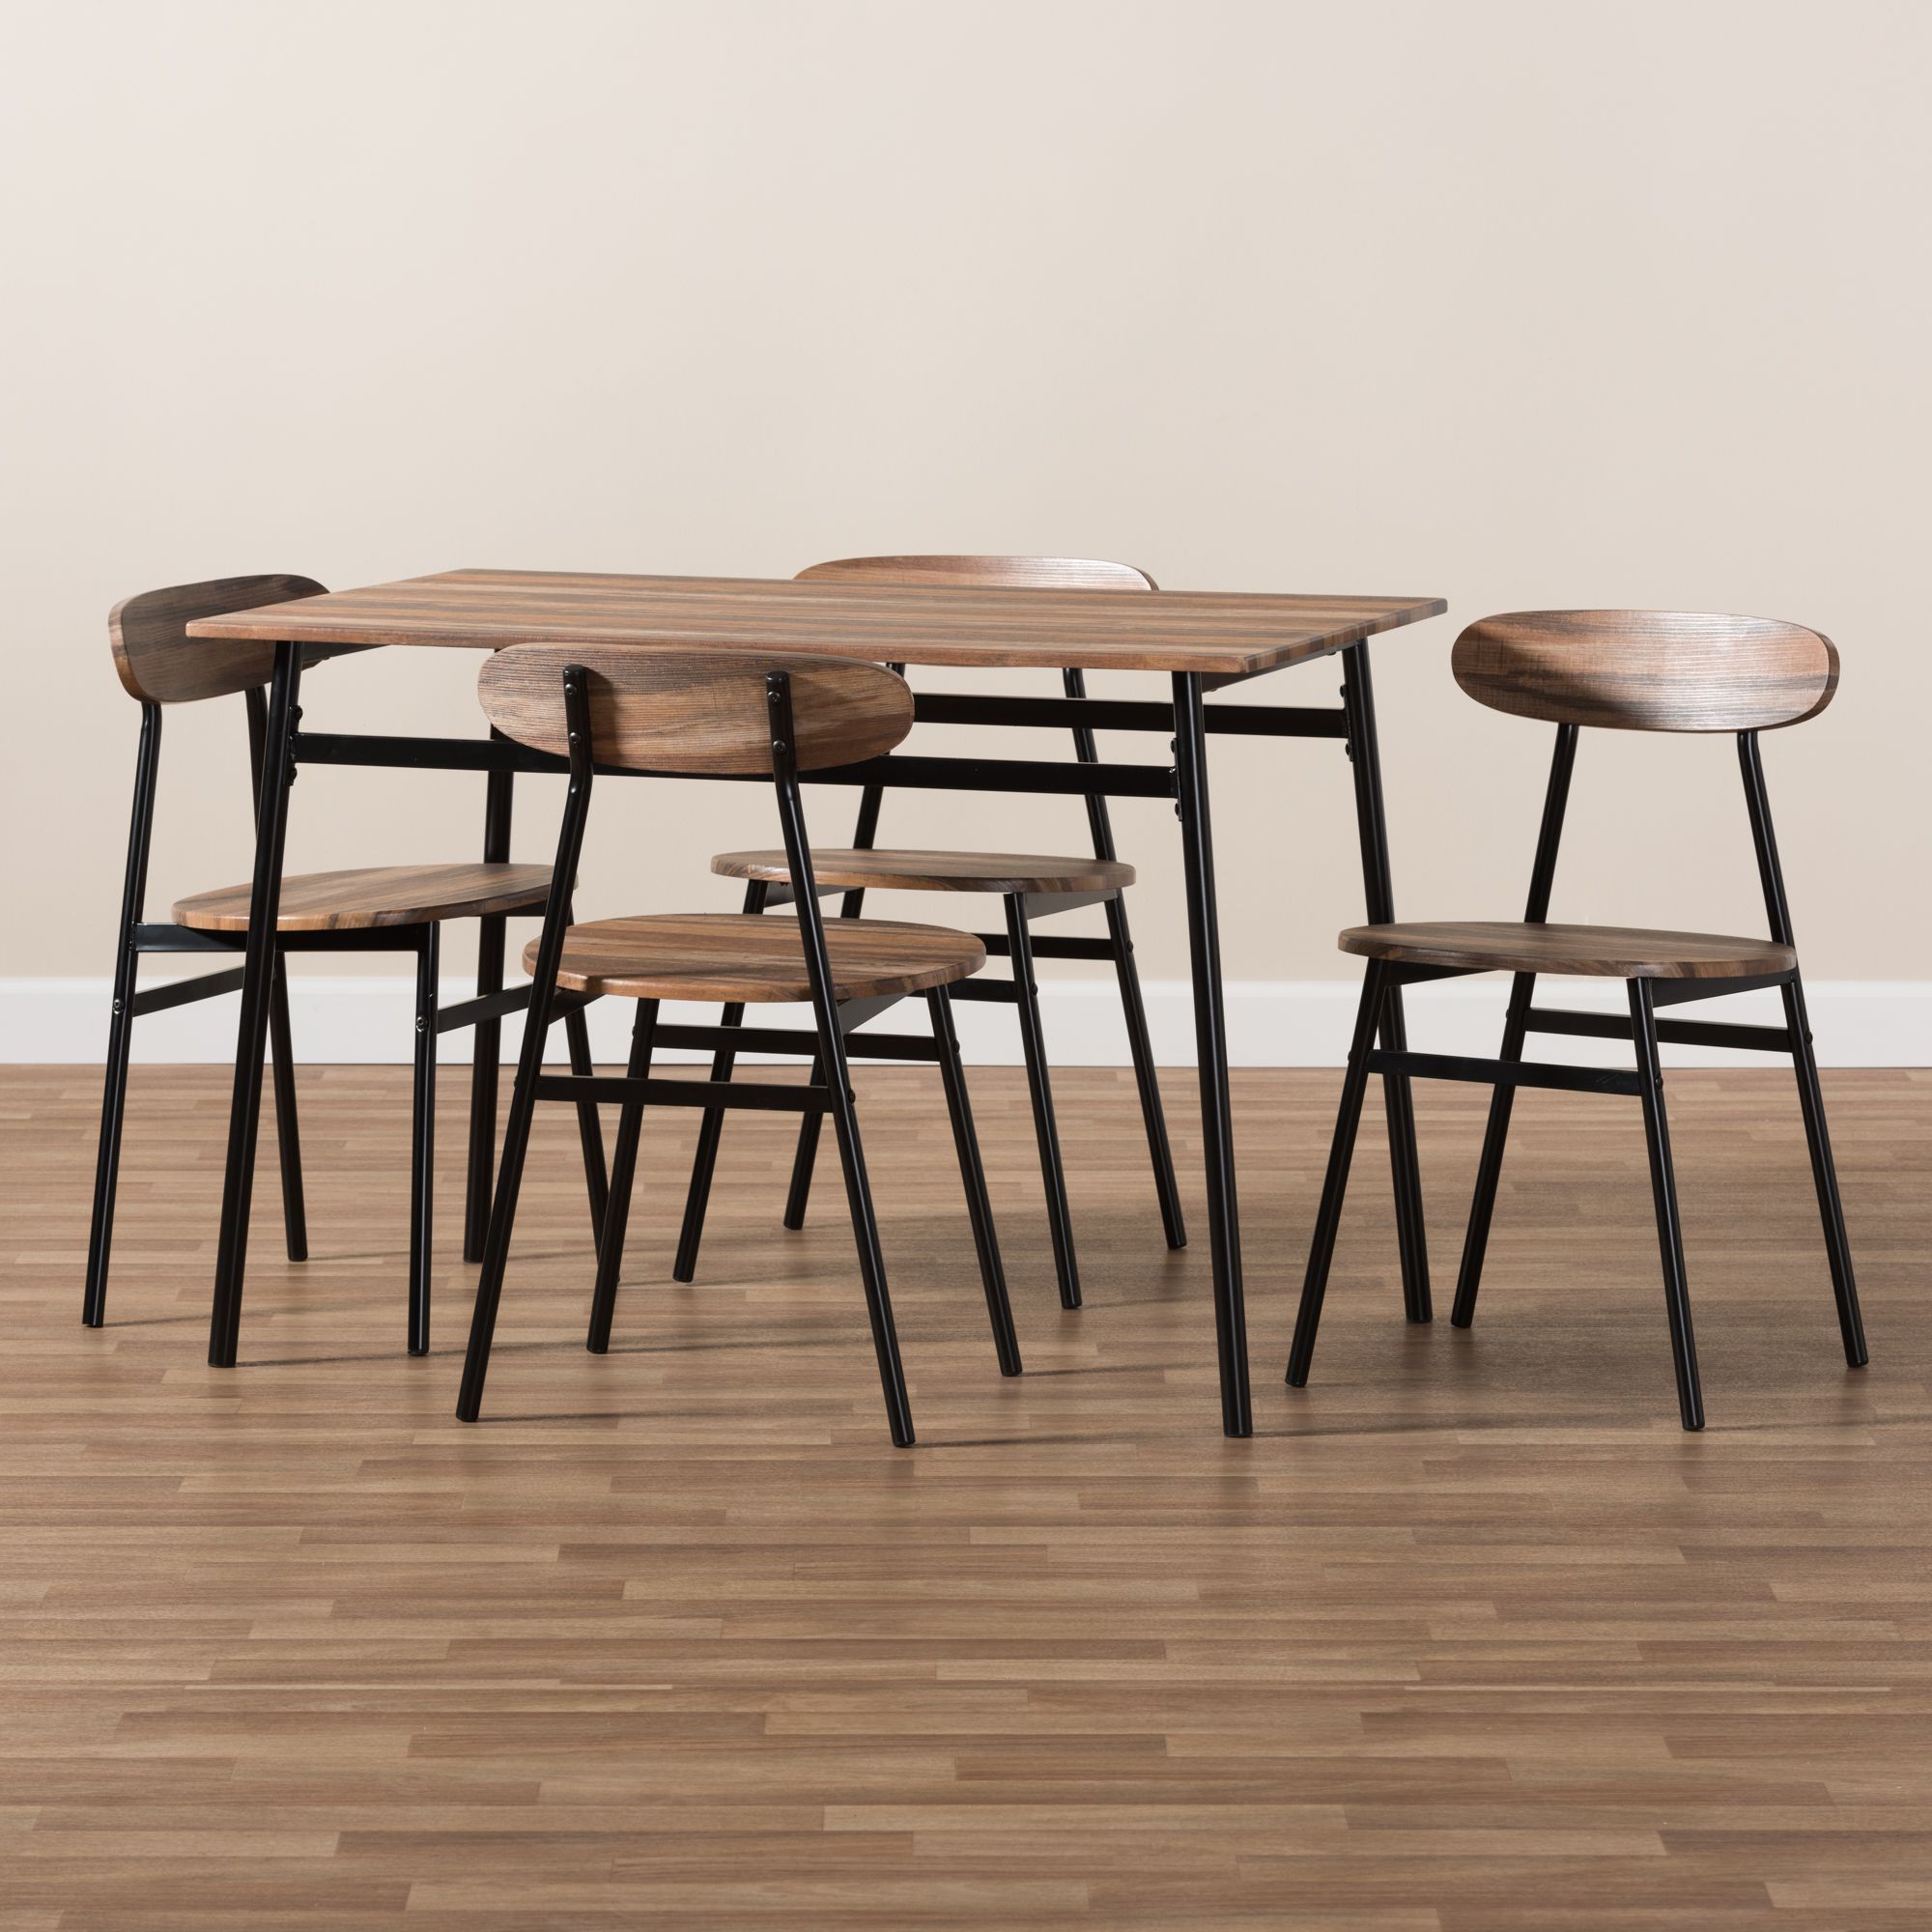 NEW Wood Dining Table Set Wooden Chairs Industrial Brown Furniture Top Back Rustic Finished Matte Black Pieces Natural Indoor Breakfast Room*↓READ↓*